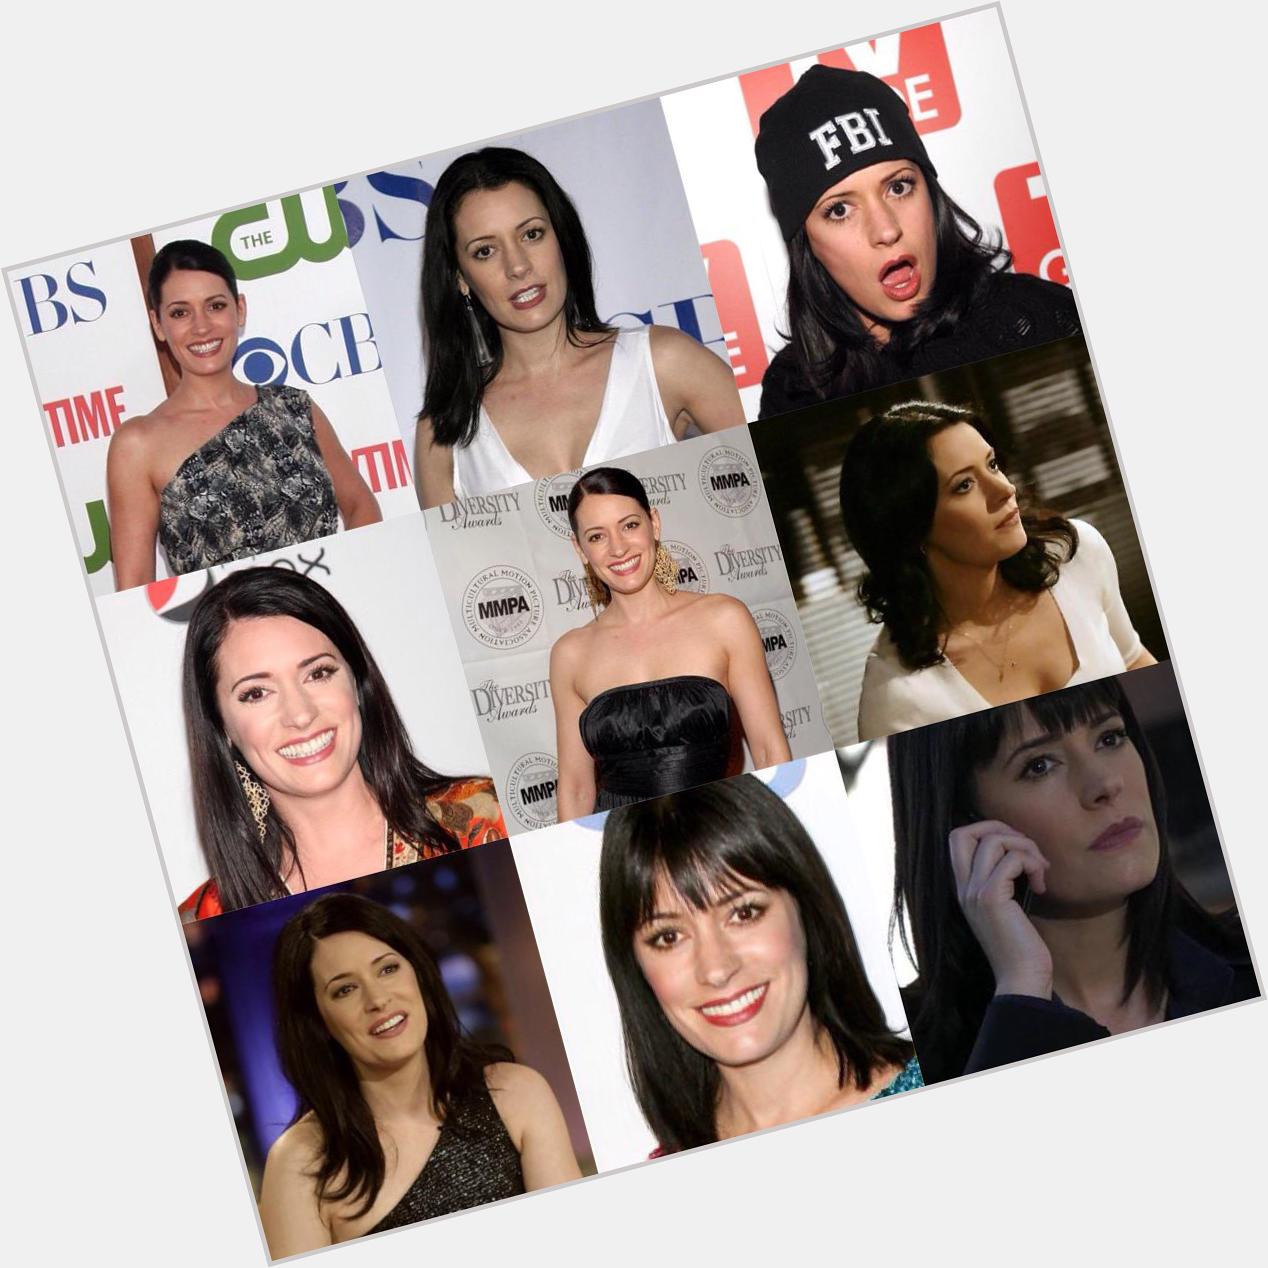 Happy birthday Paget Brewster   I hope you have an amazing day Your an amazing actor,  I love you    